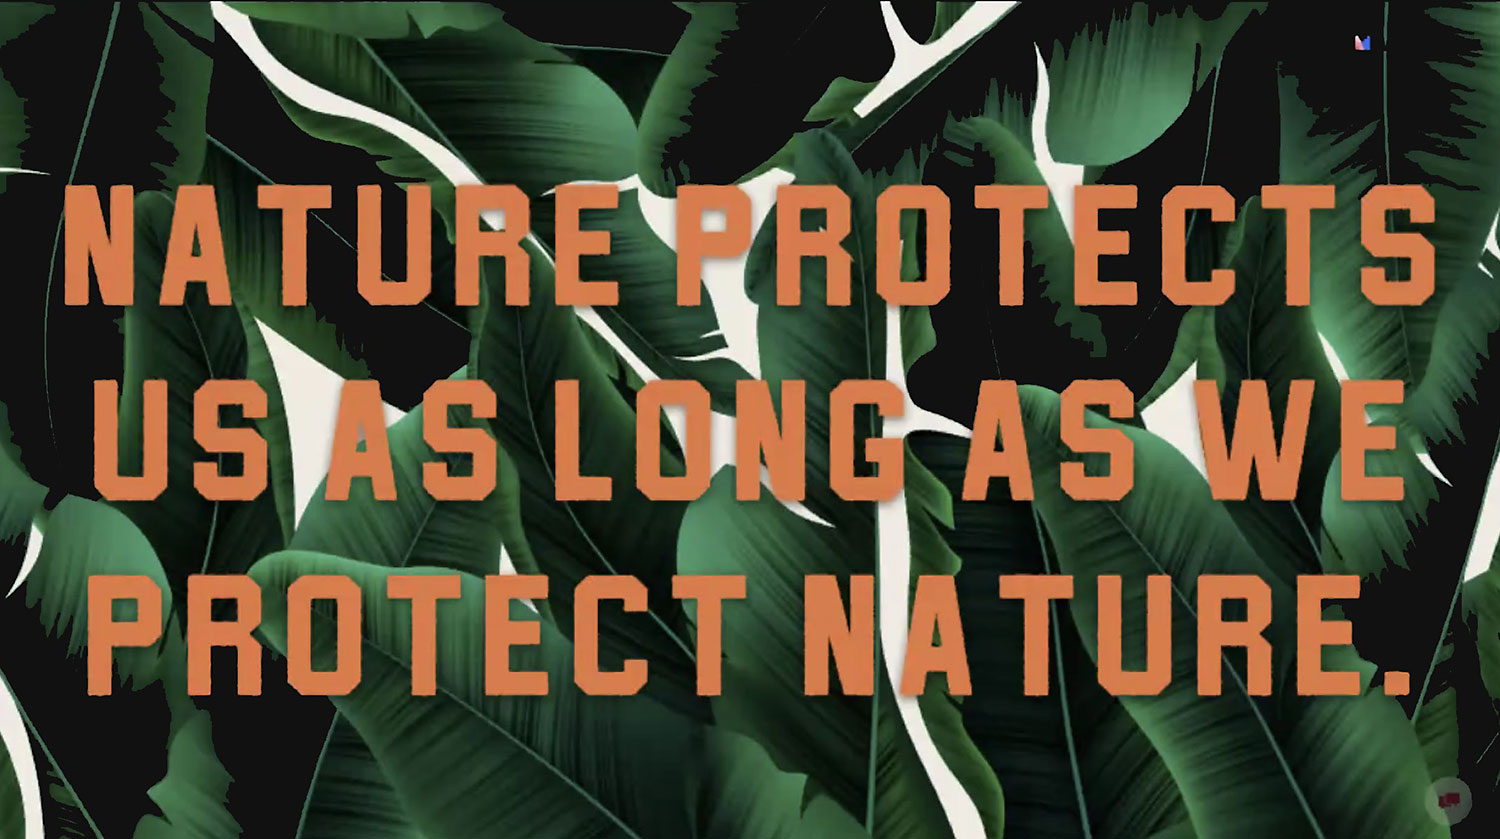 Nature Protects us as long as we protect nature